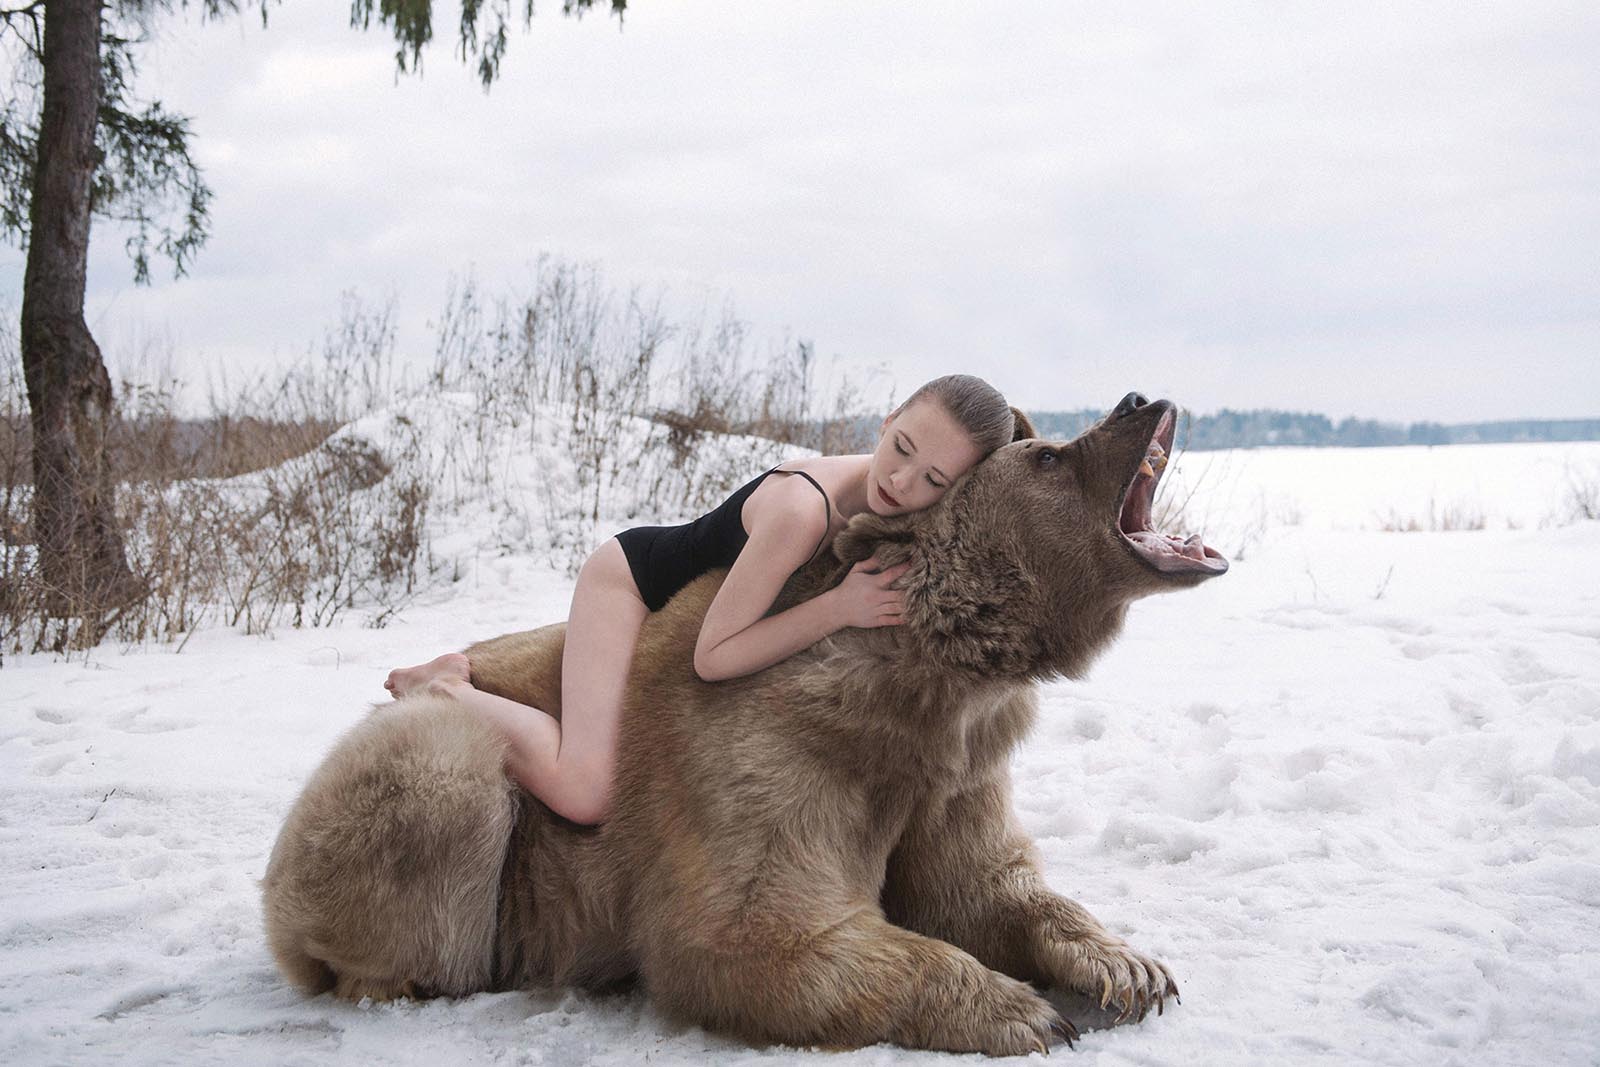 The Russian Photographer Who Shoots Dreamlike Portraits with Real Animals